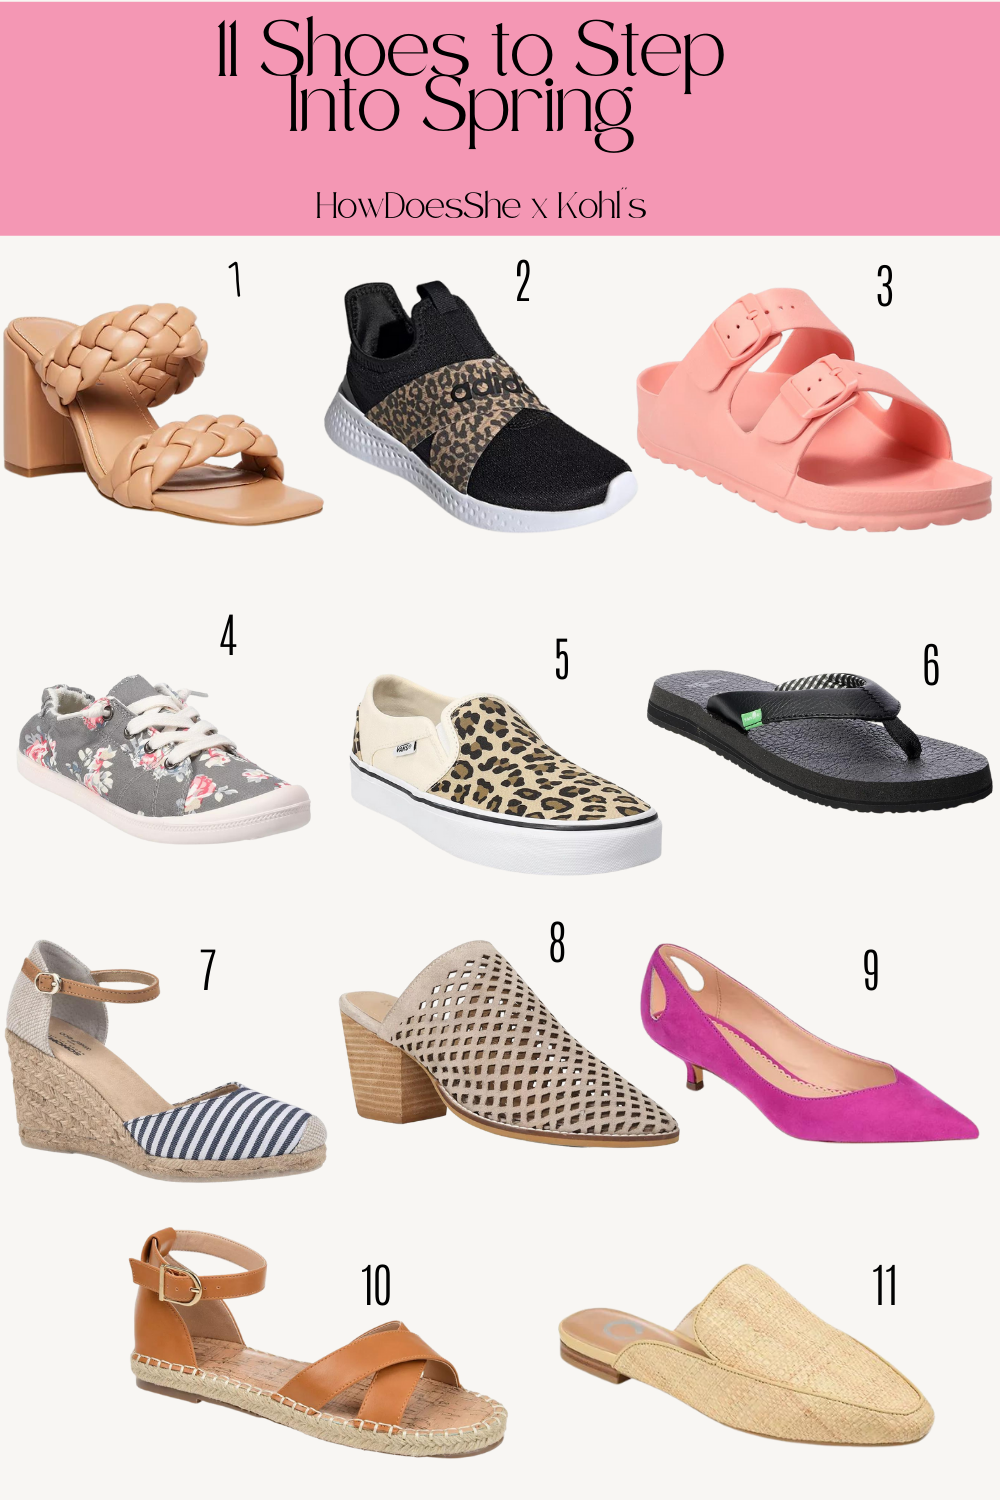 11 Shoes to Help You Step Into Spring